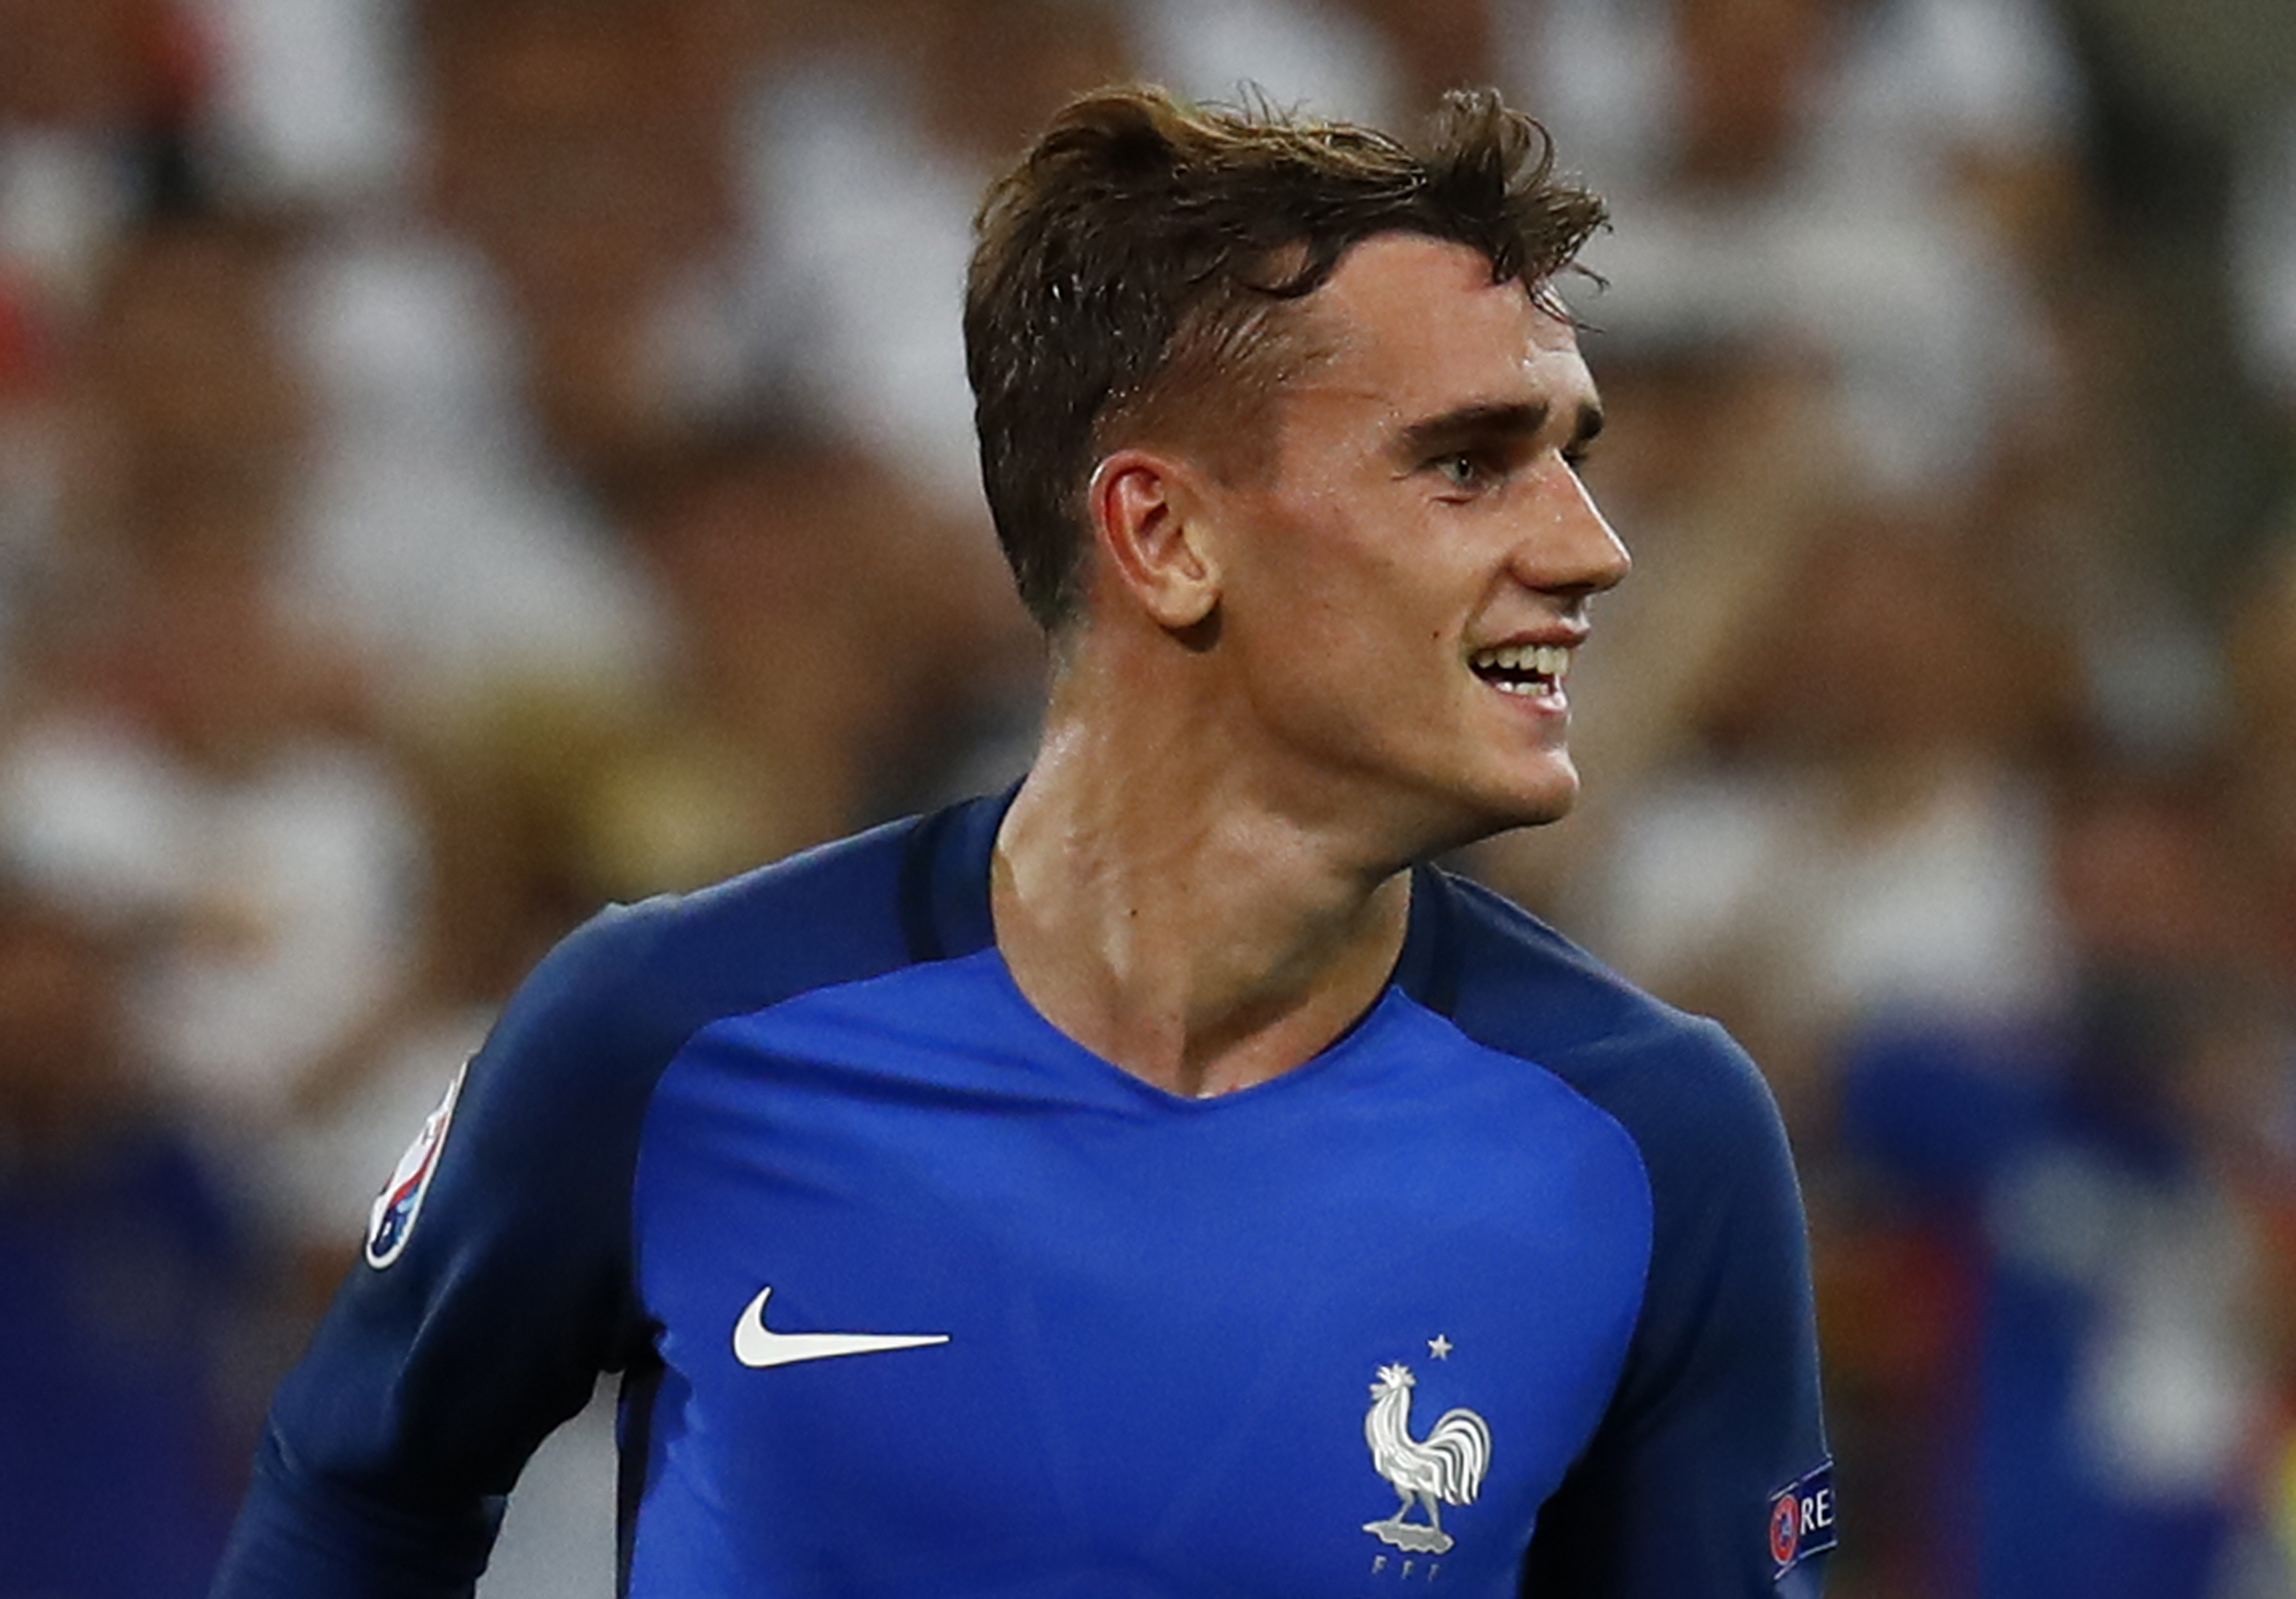 Euro 2016: Griezmann double helps France sink Germany to reach final